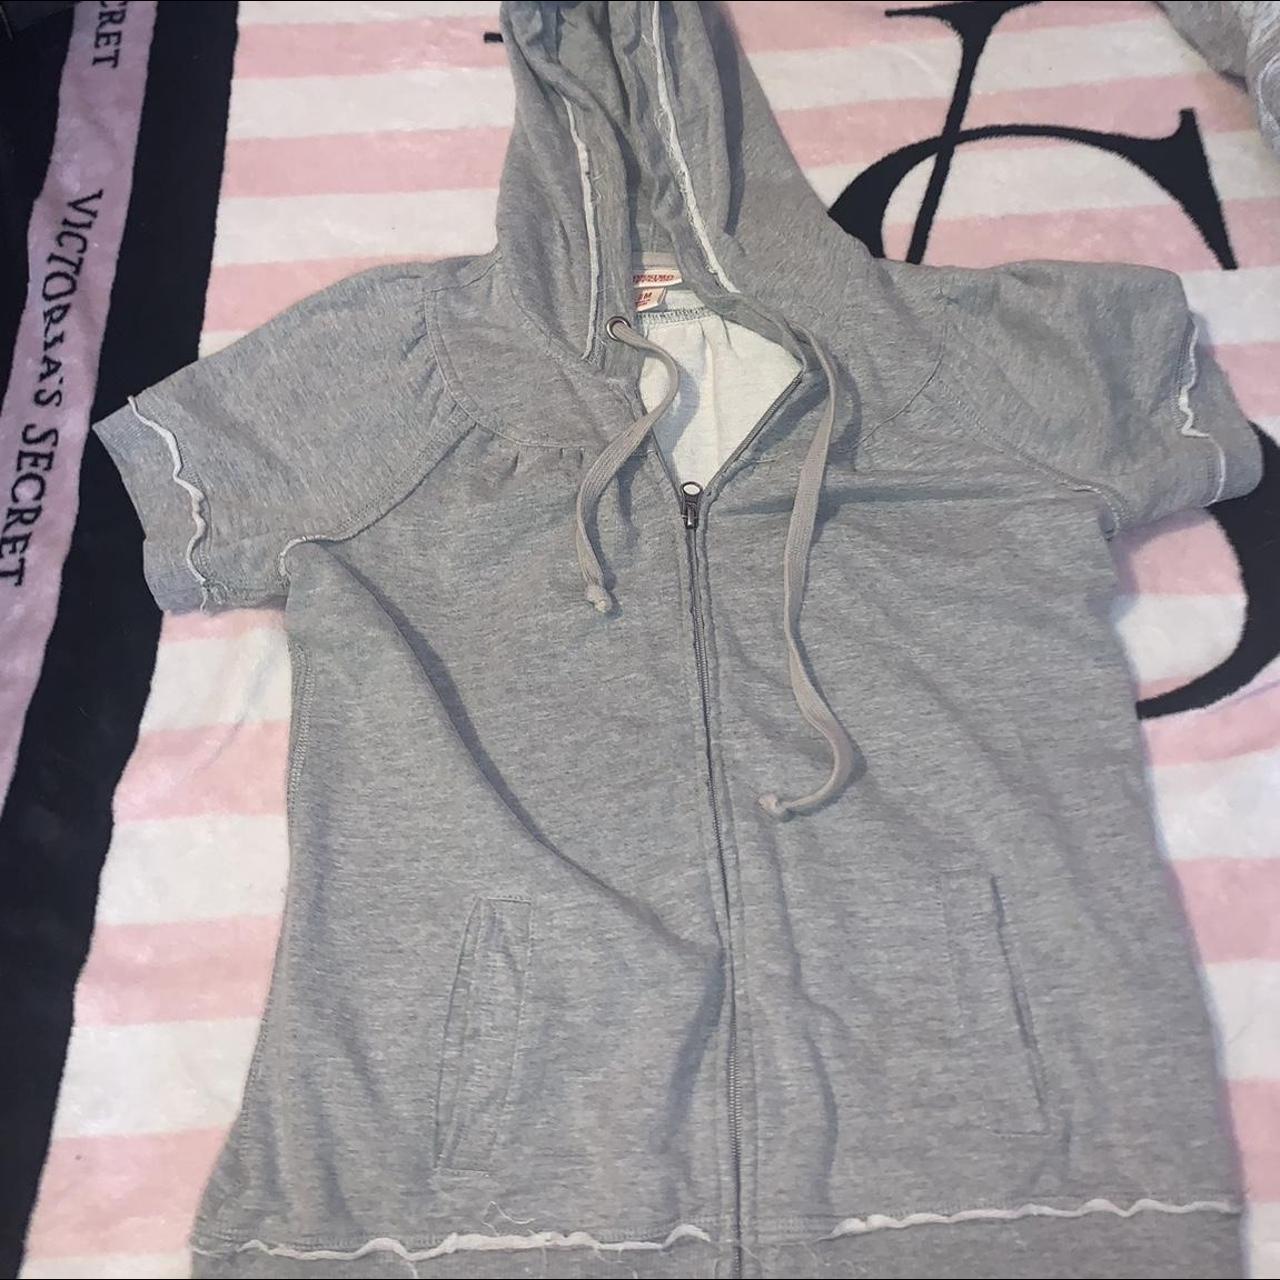 item listed by luvthepercs